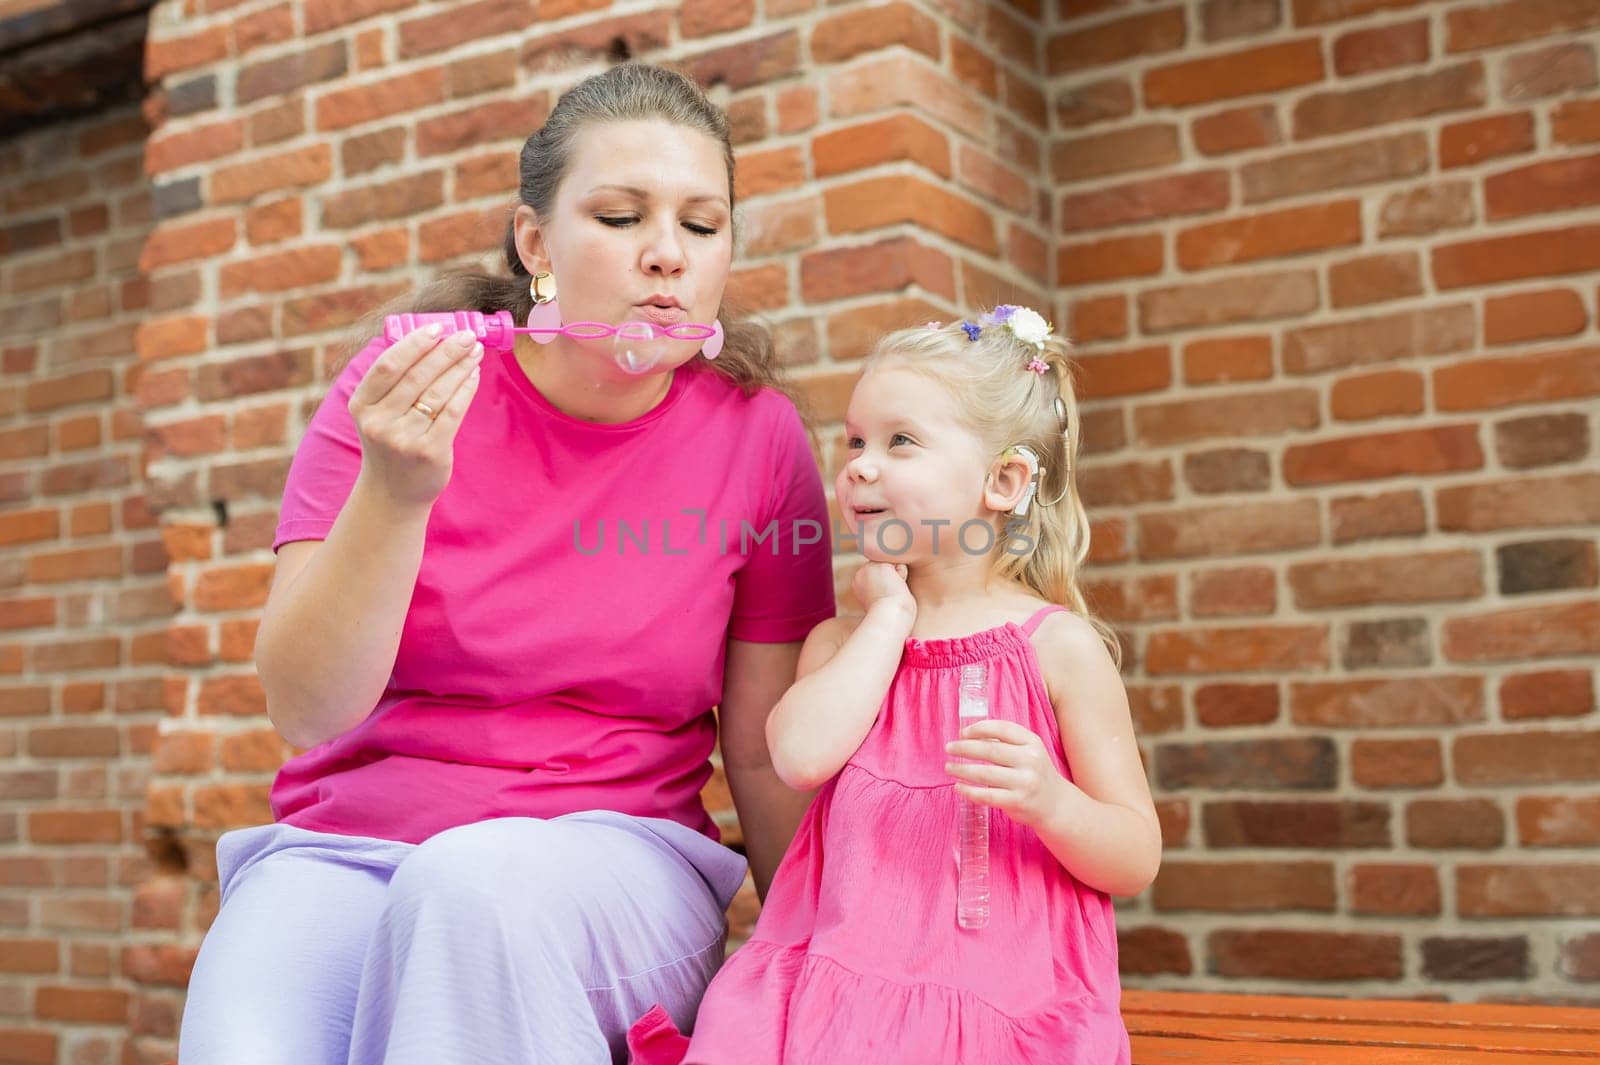 Blonde little girl with cochlear implant blowing soap bubbles with her mother outdoor. Hear impairment deaf and health concept. Diversity and inclusion. Copy space by Satura86